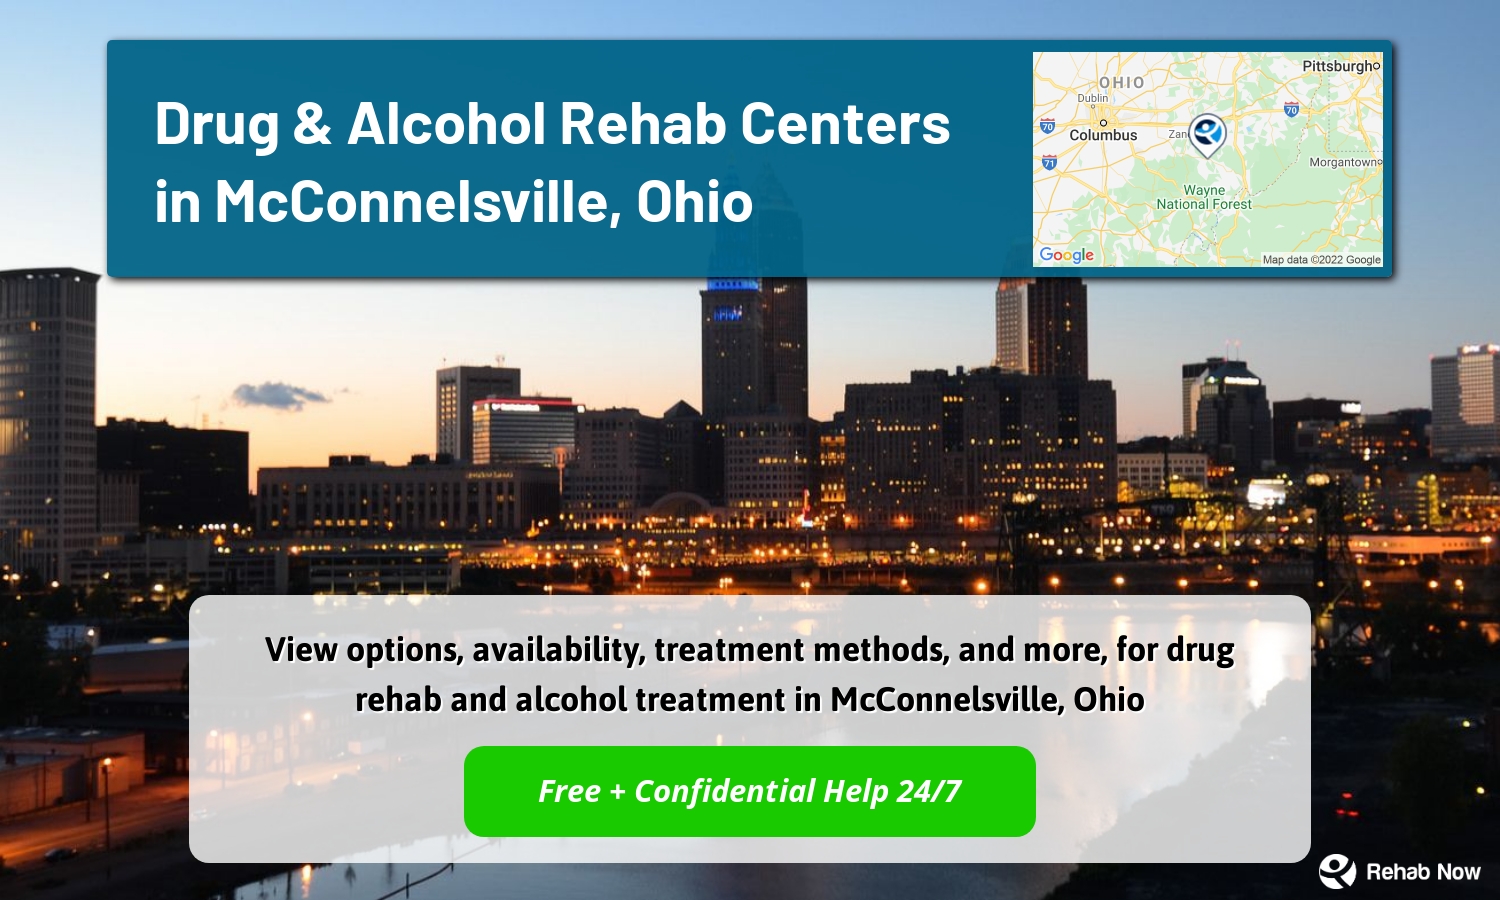 View options, availability, treatment methods, and more, for drug rehab and alcohol treatment in McConnelsville, Ohio